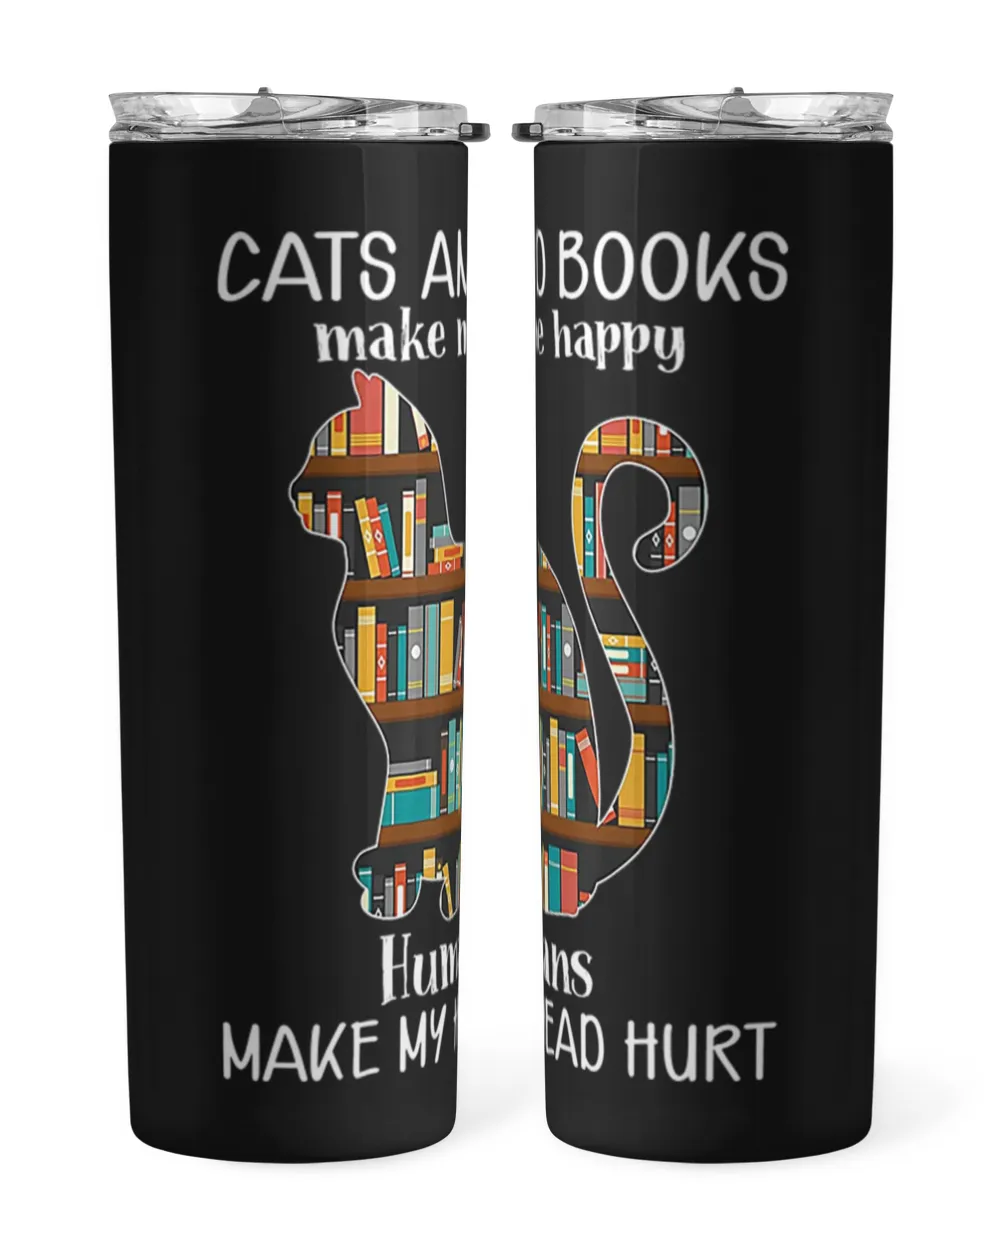 Cats And Books Cats and Books Make Me Happy Vintage Cat Book Reading Gift  Lorelaimorris